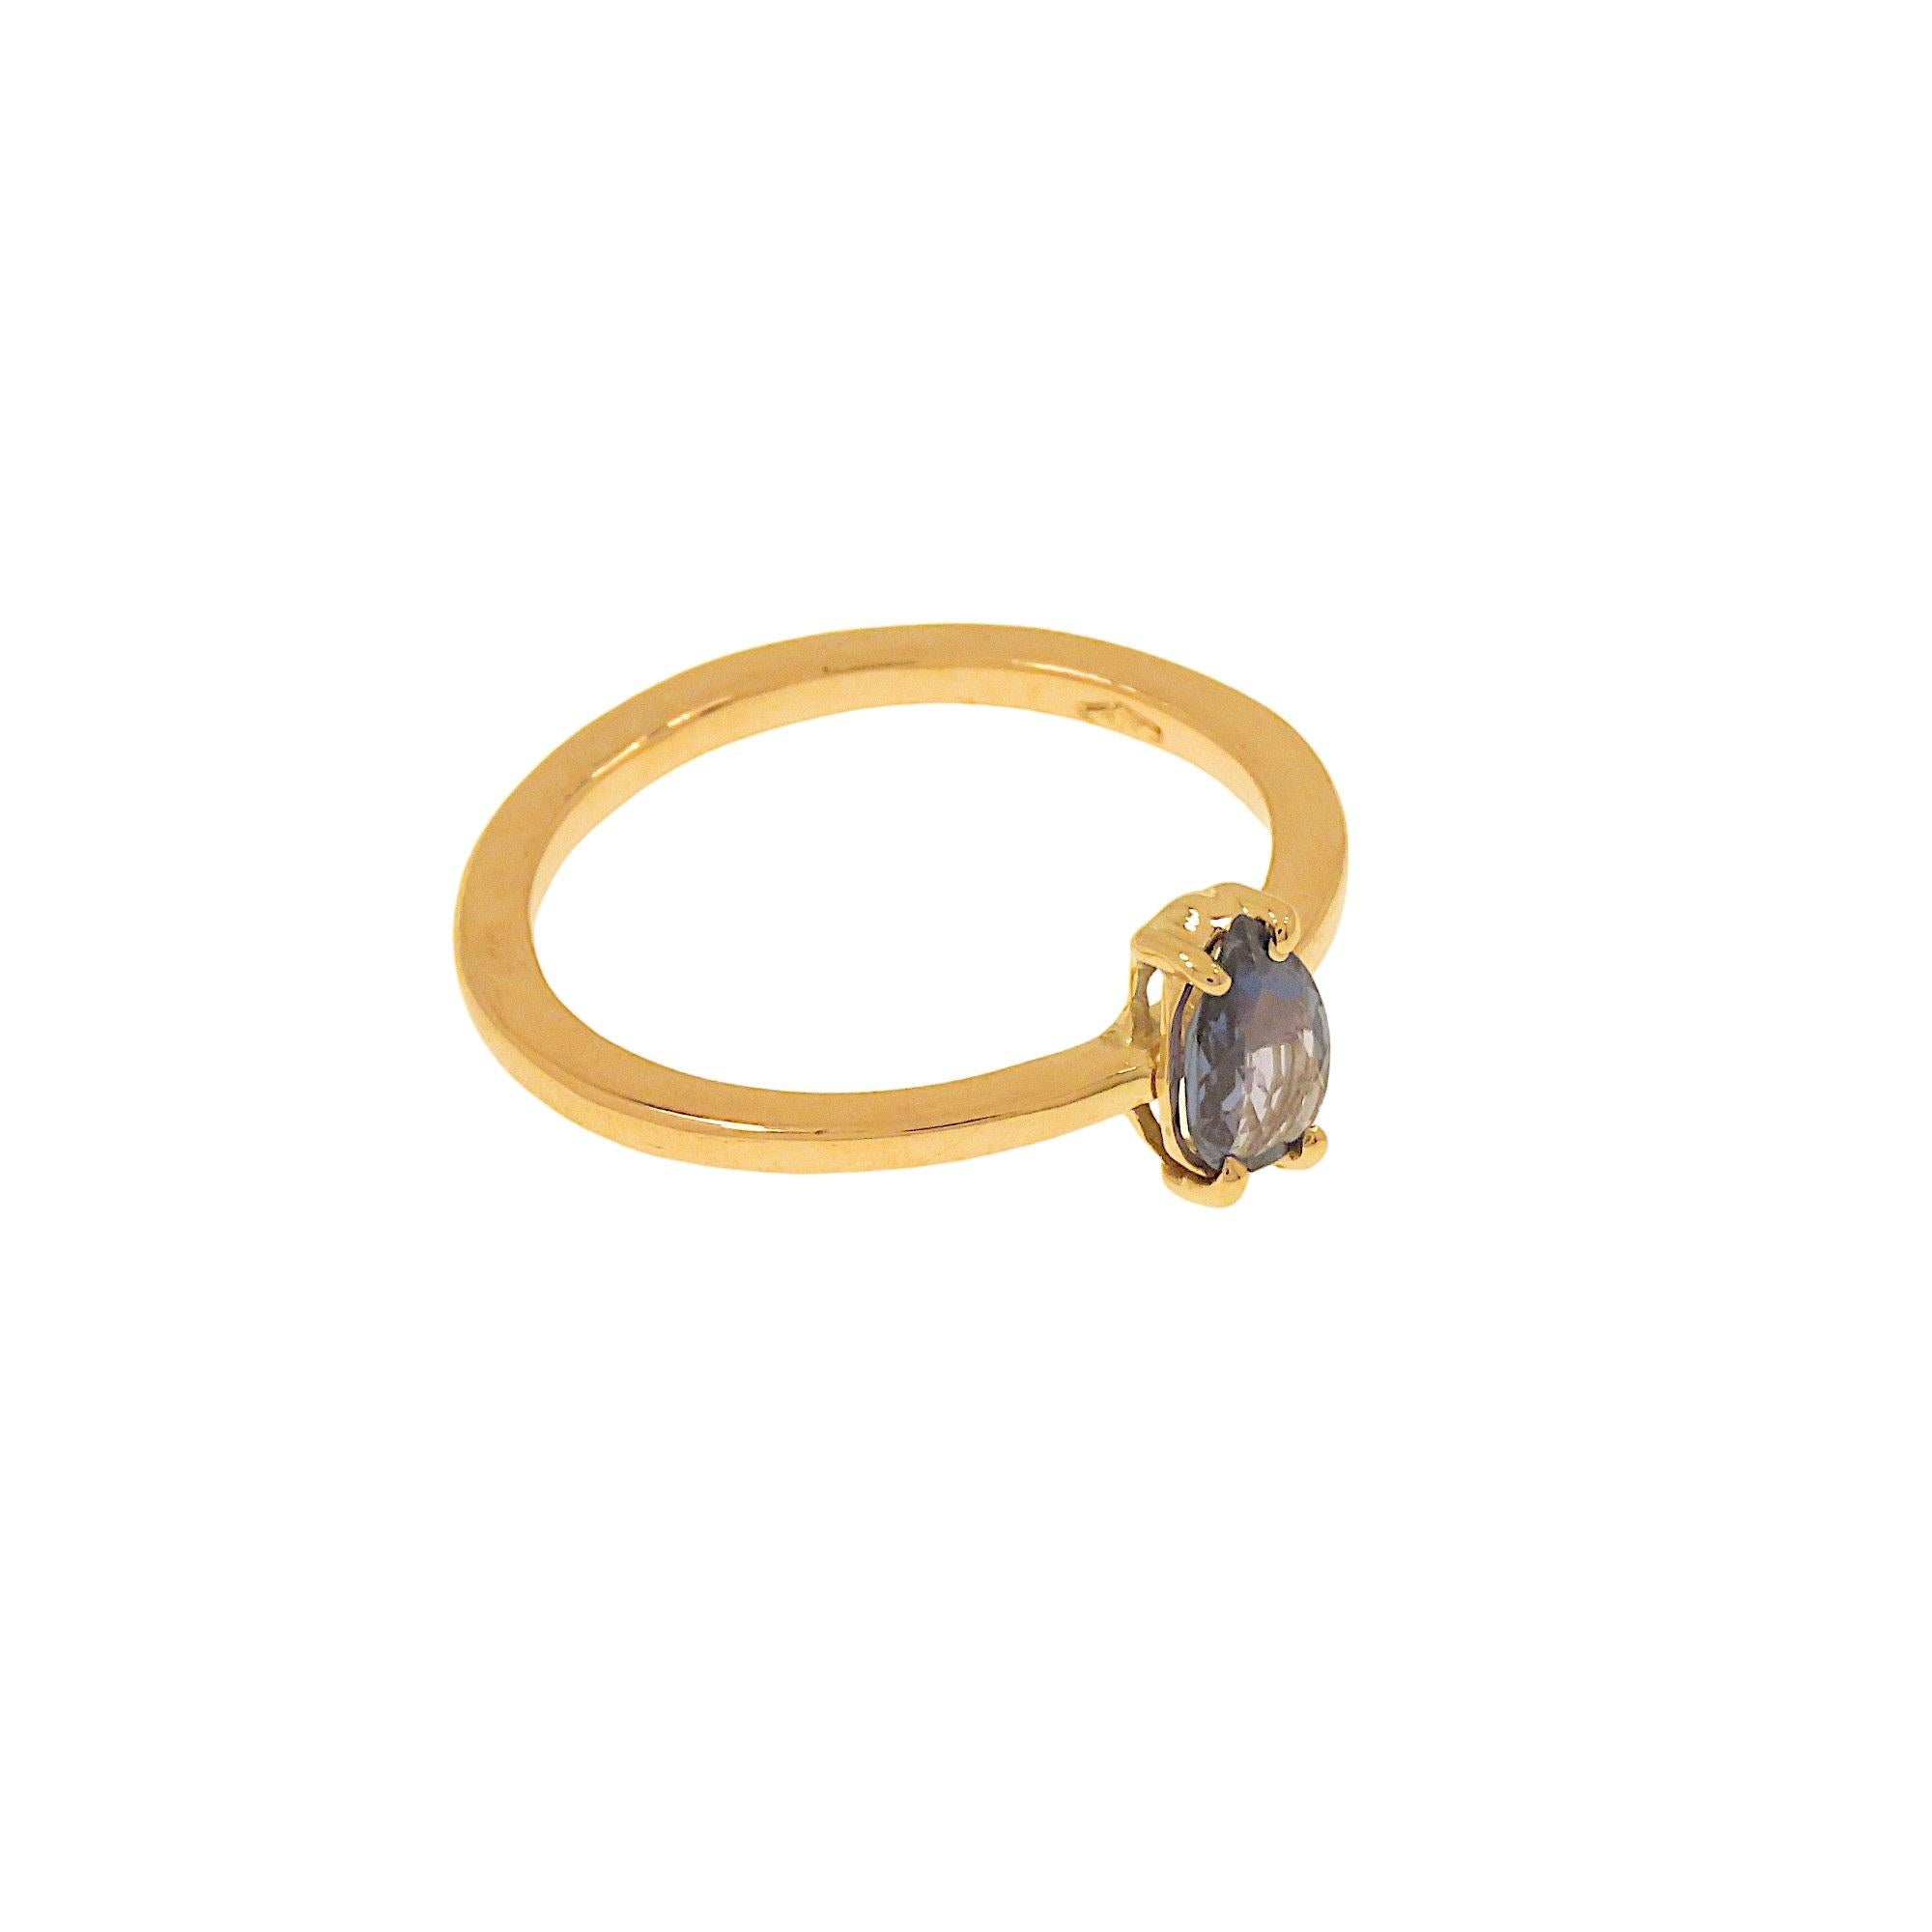 Botta jewelry blue sapphire ring in rose gold made in Italy For Sale 1